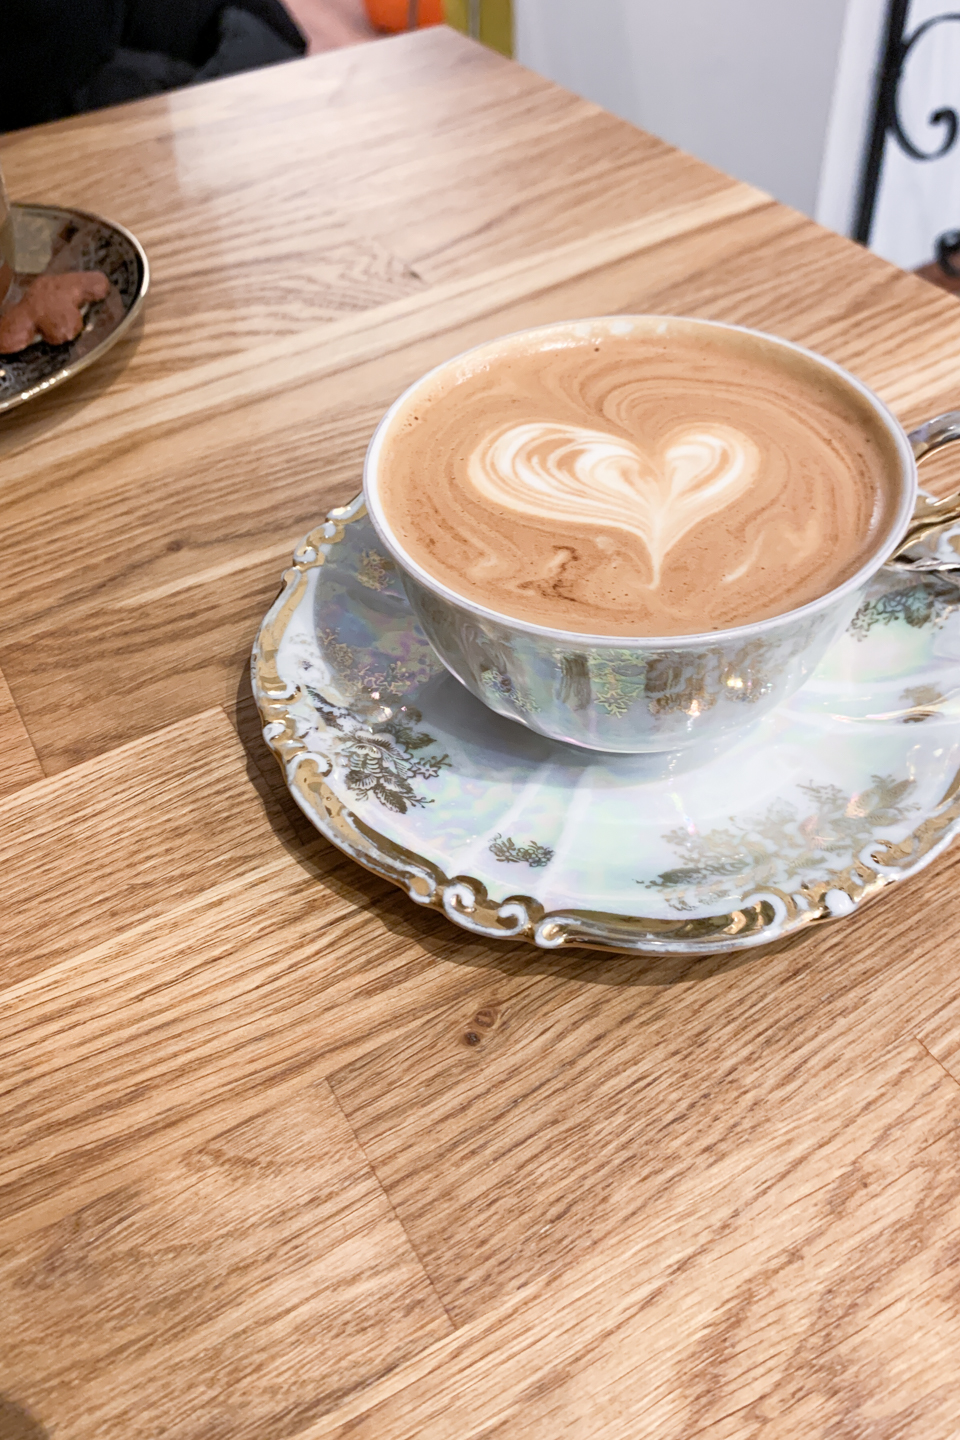 Flat white with heart-shaped coffee art at Crumble Cake café